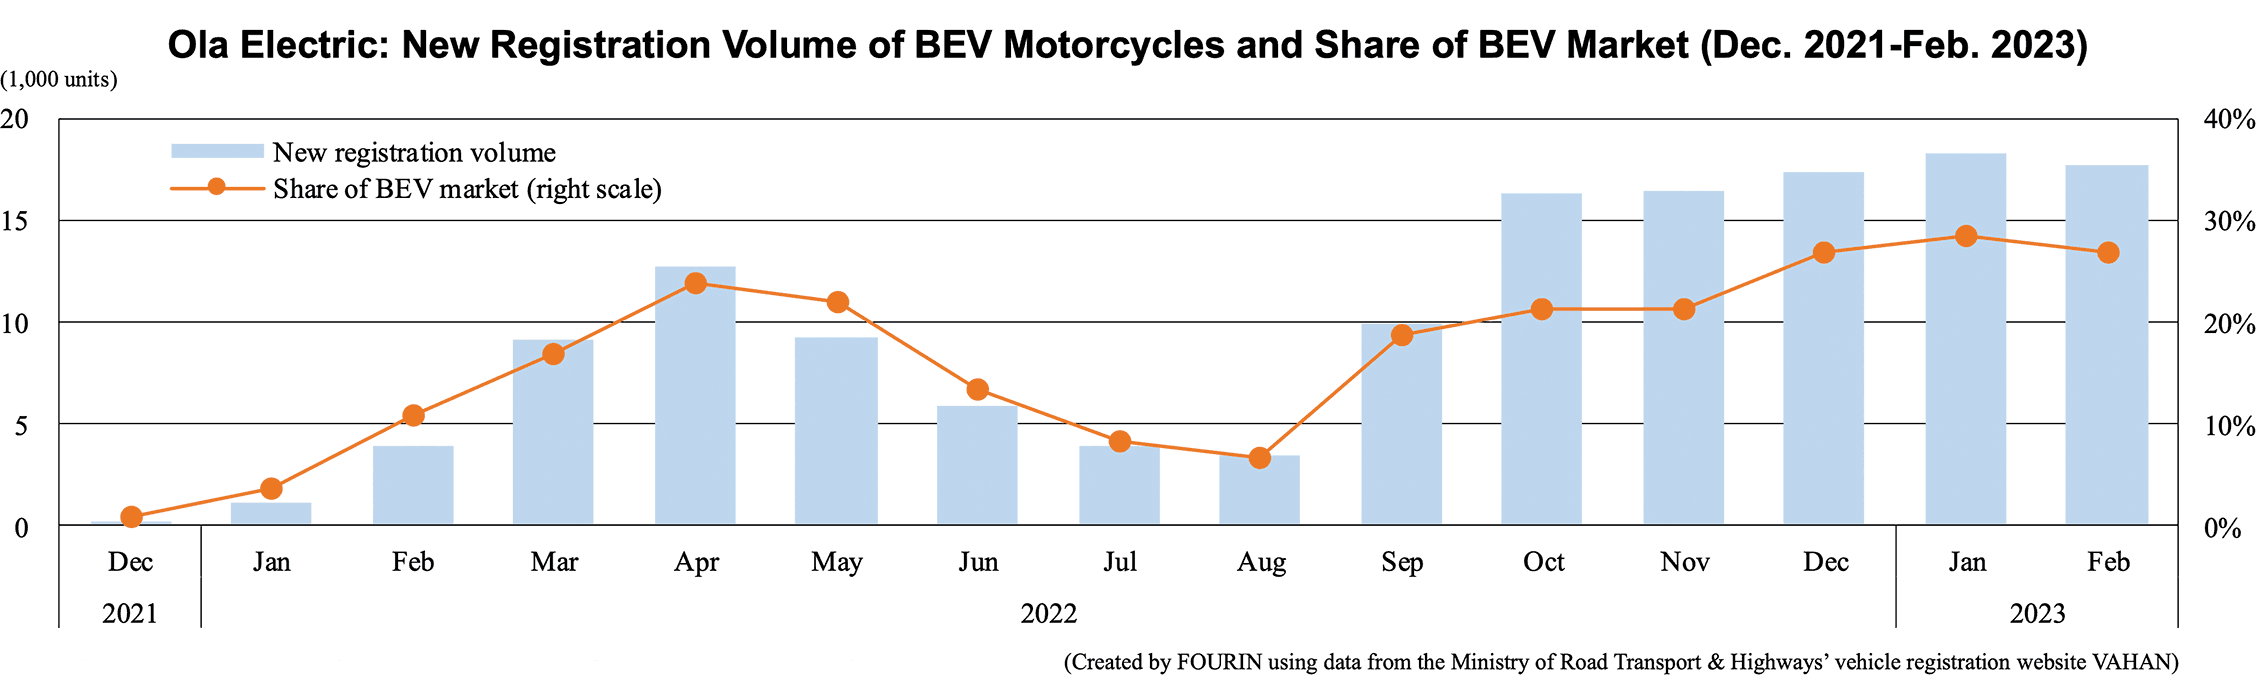 Graph: Ola Electric: New Registration Volume of BEV Motorcycles and Share of BEV Market (Dec. 2021-Feb. 2023)